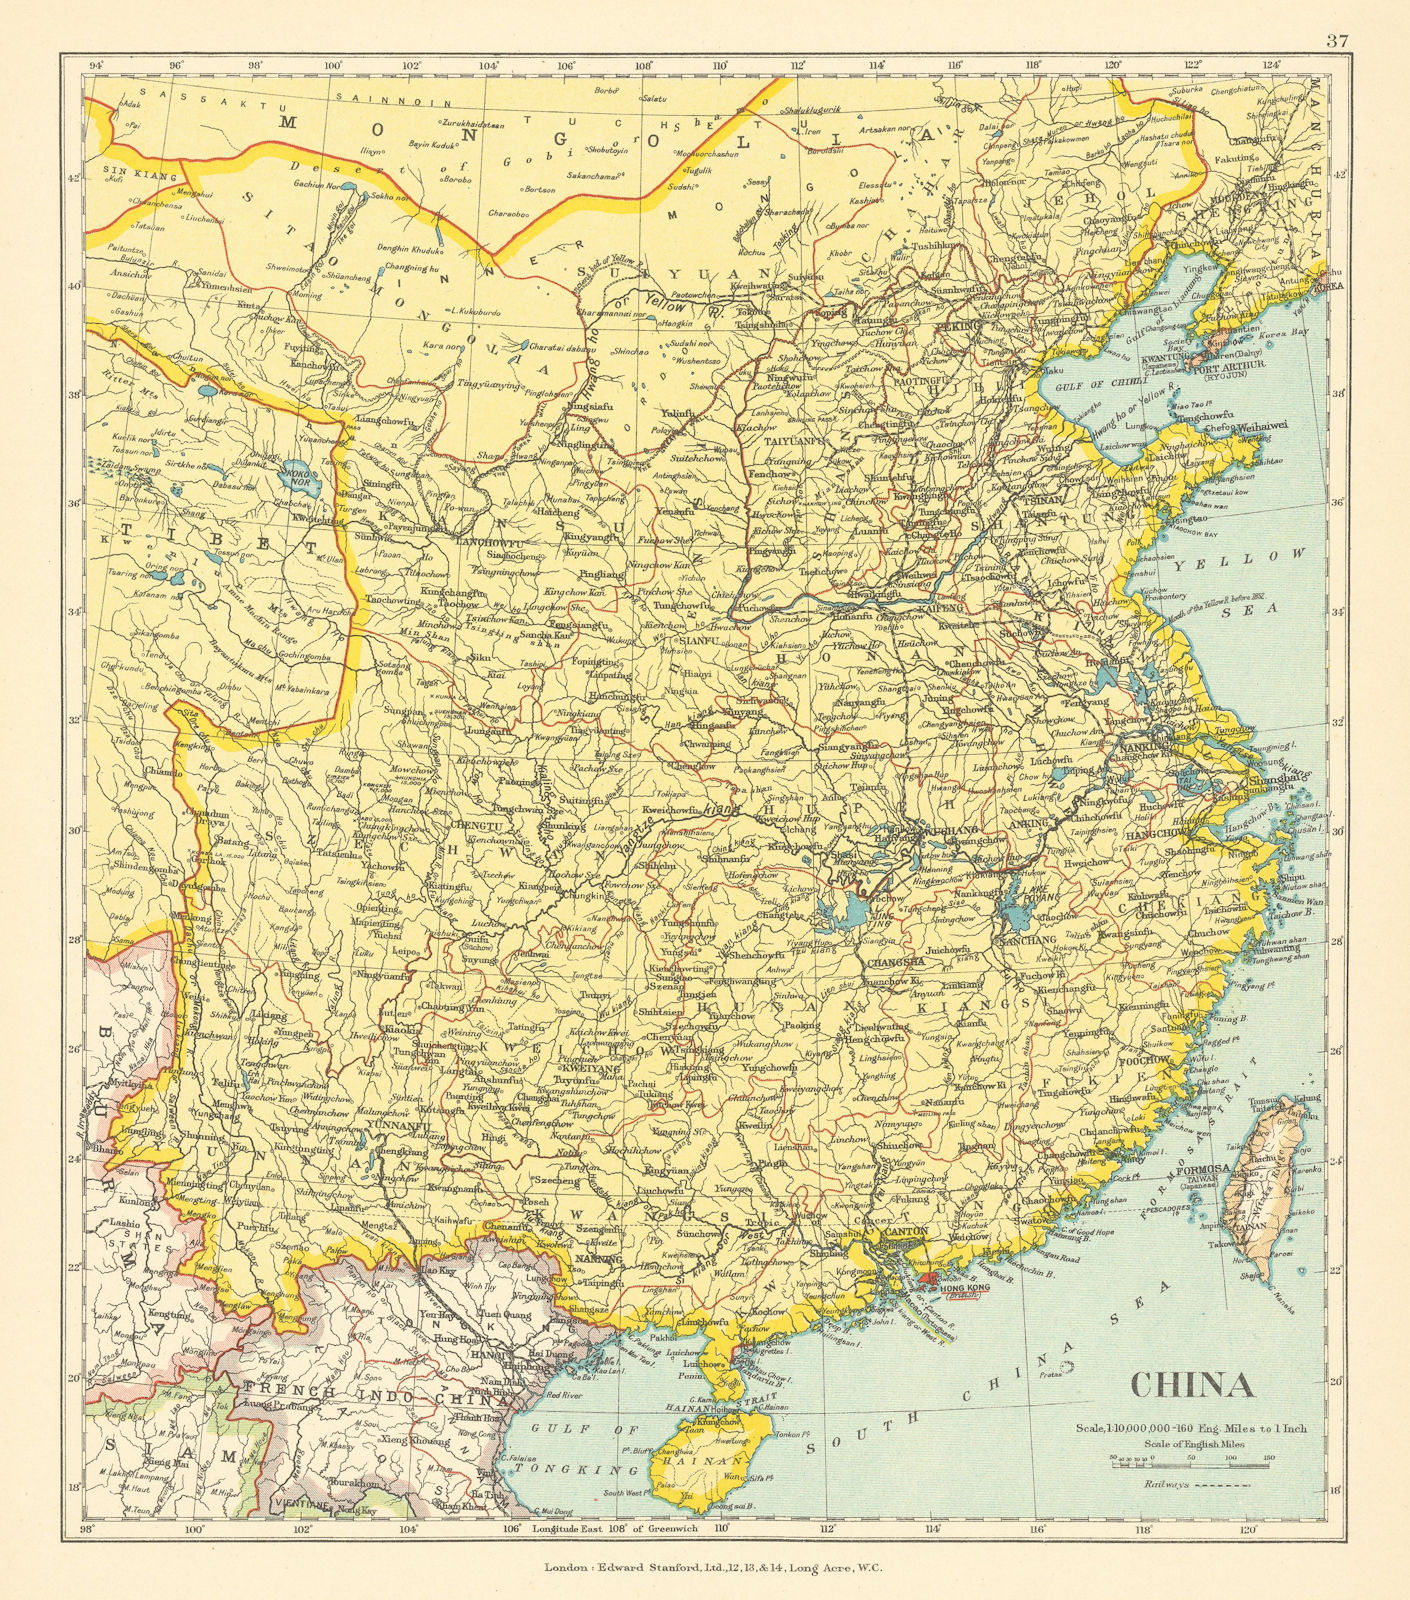 Associate Product China in provinces. Formosa Taiwan. STANFORD c1925 old vintage map plan chart